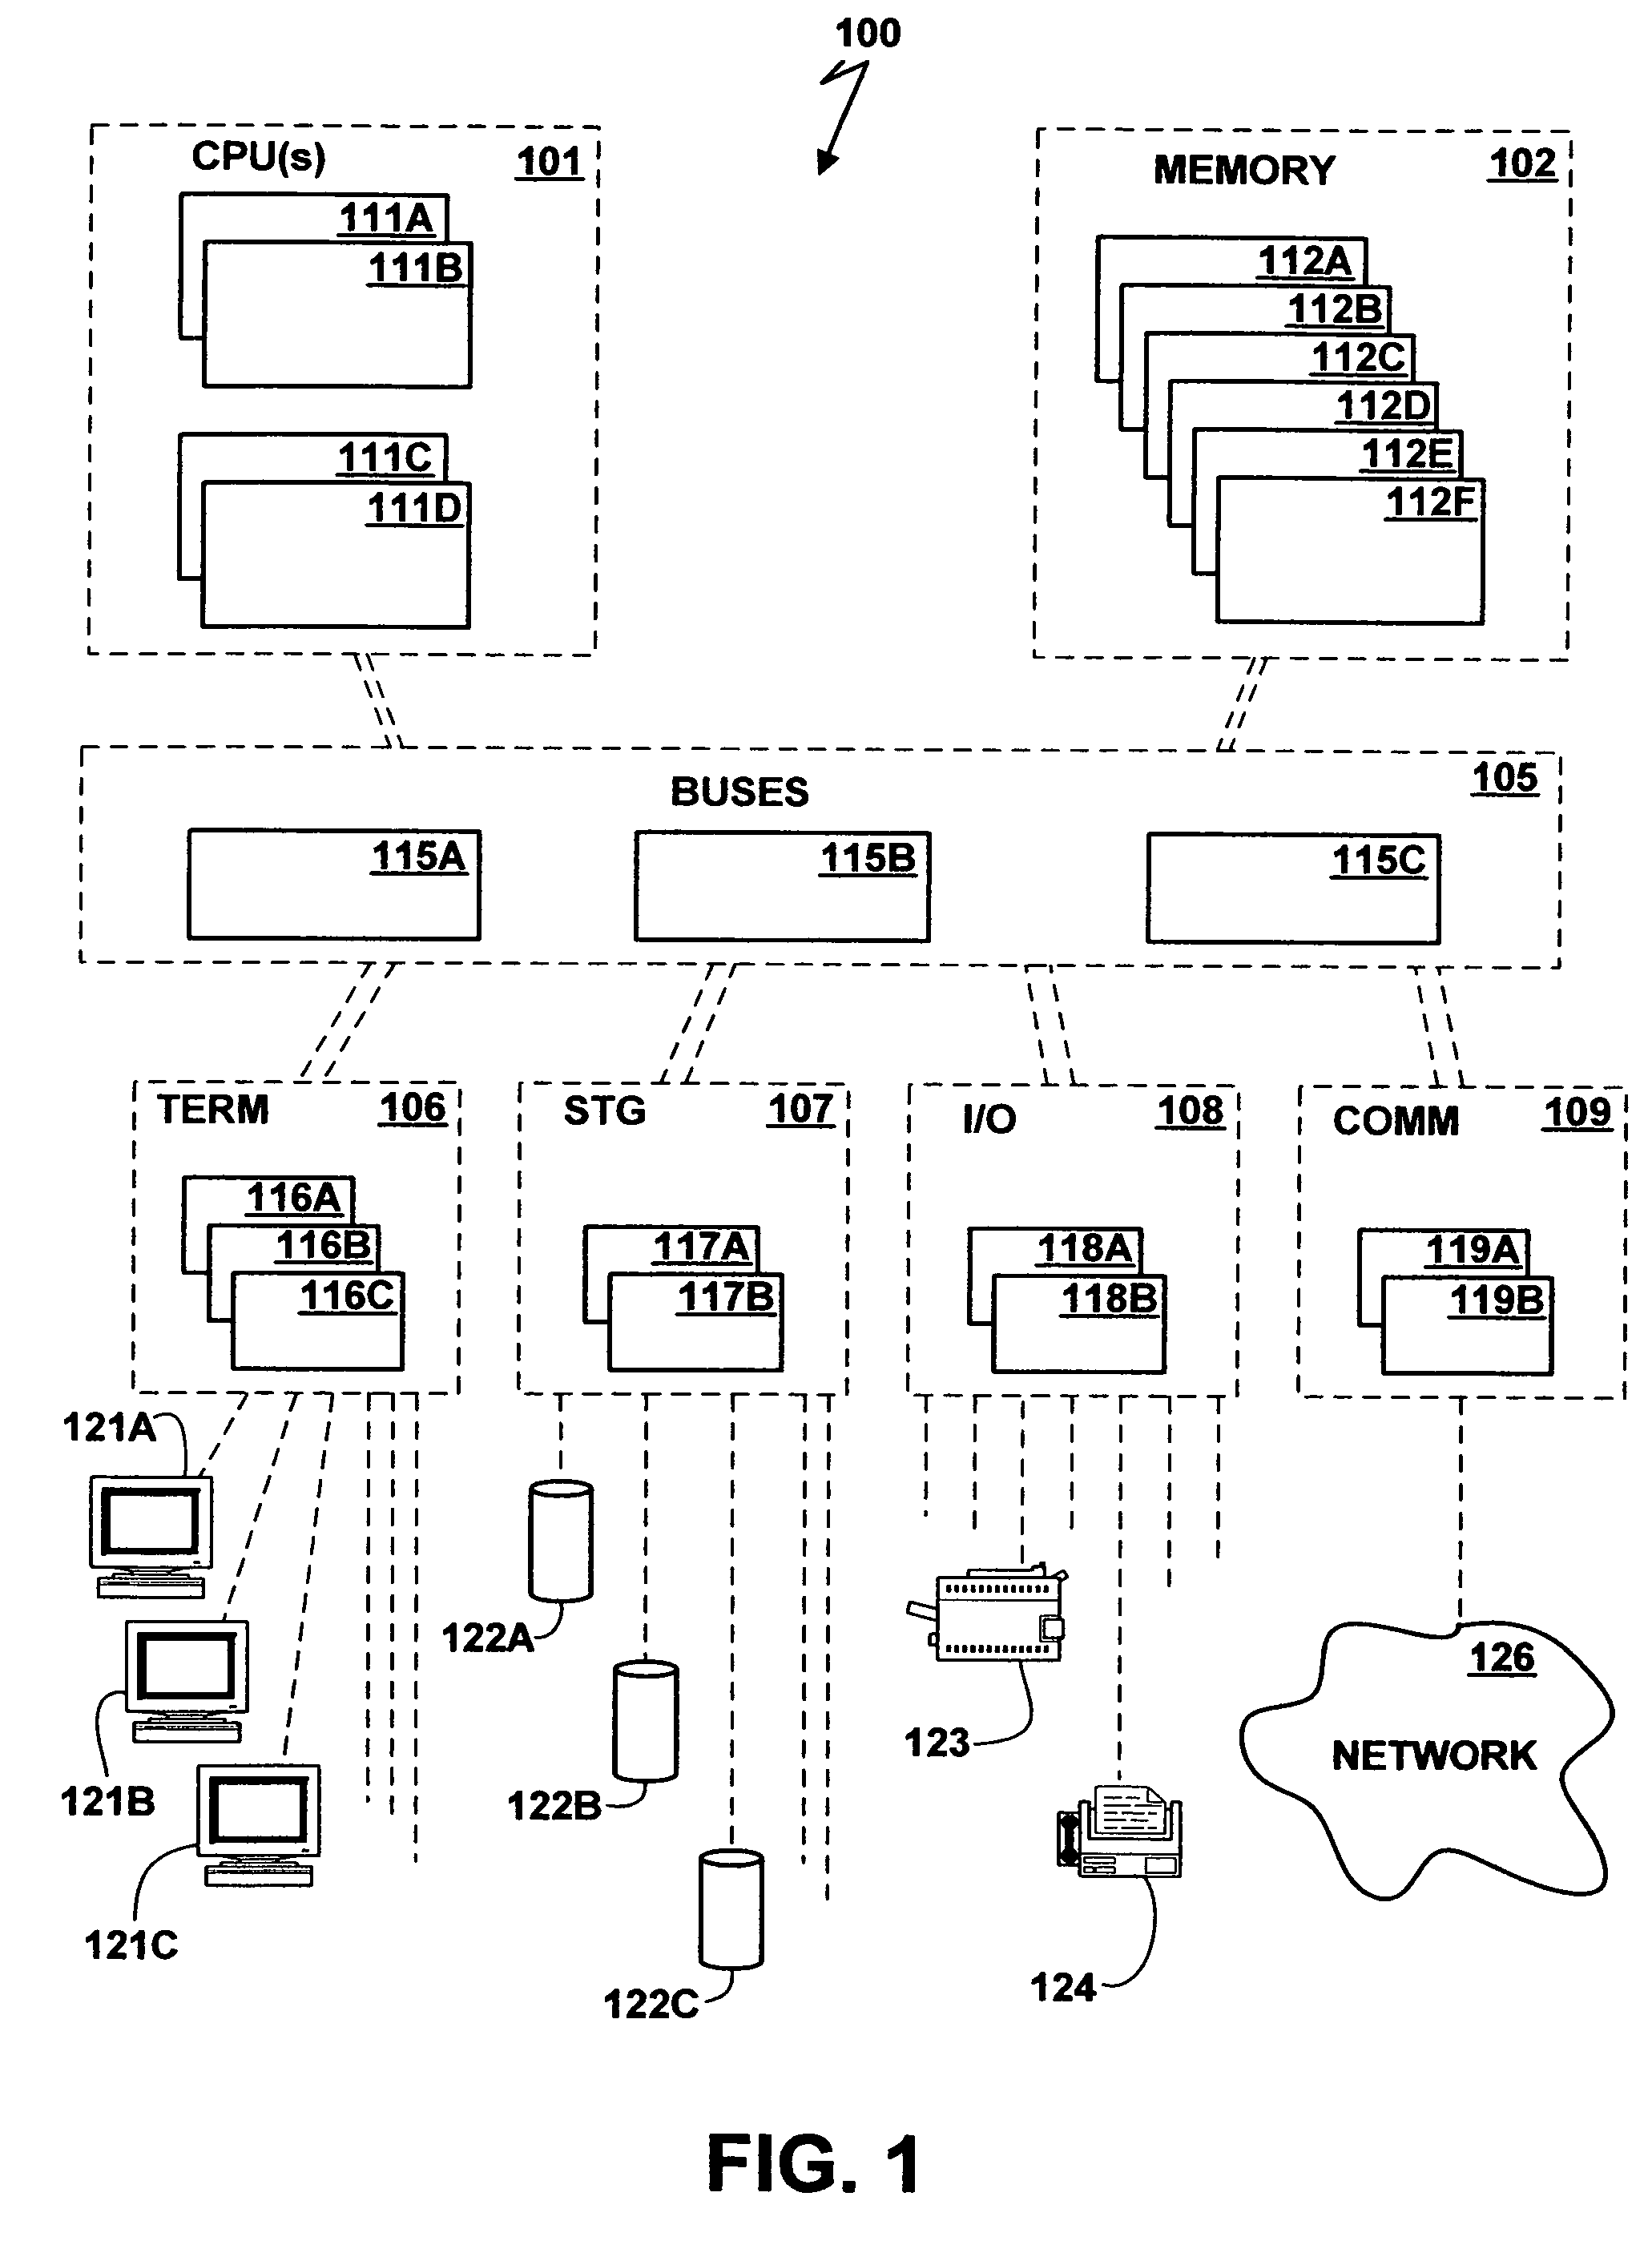 Integrated circuit chip utilizing dielectric layer having oriented cylindrical voids formed from carbon nanotubes